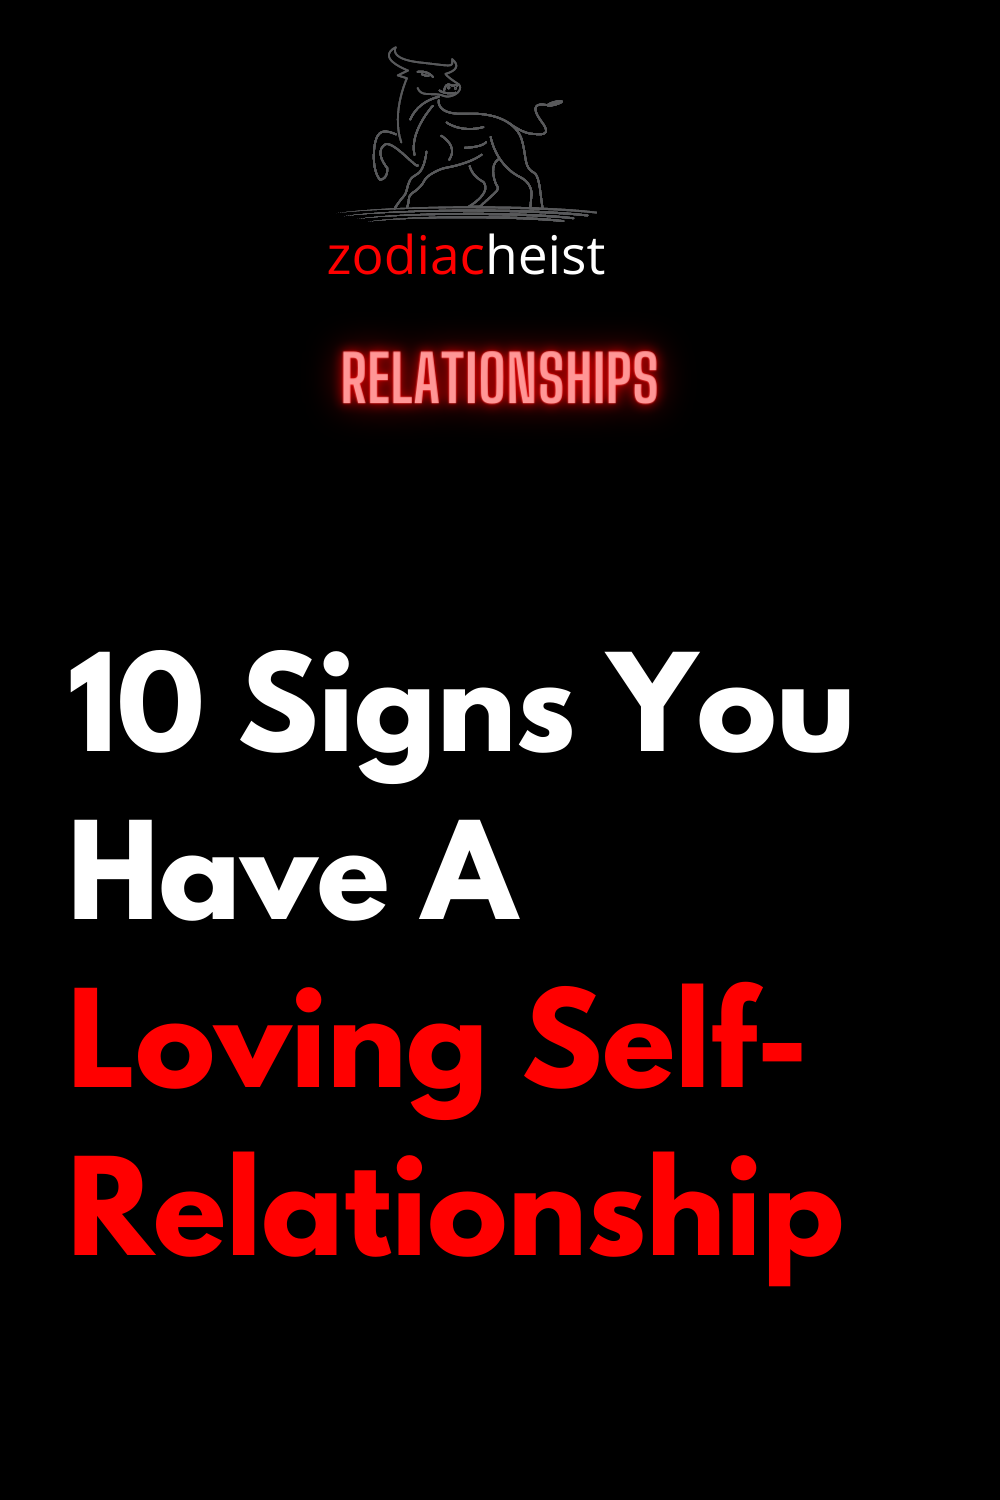 10 Signs You Have A Loving Self-Relationship